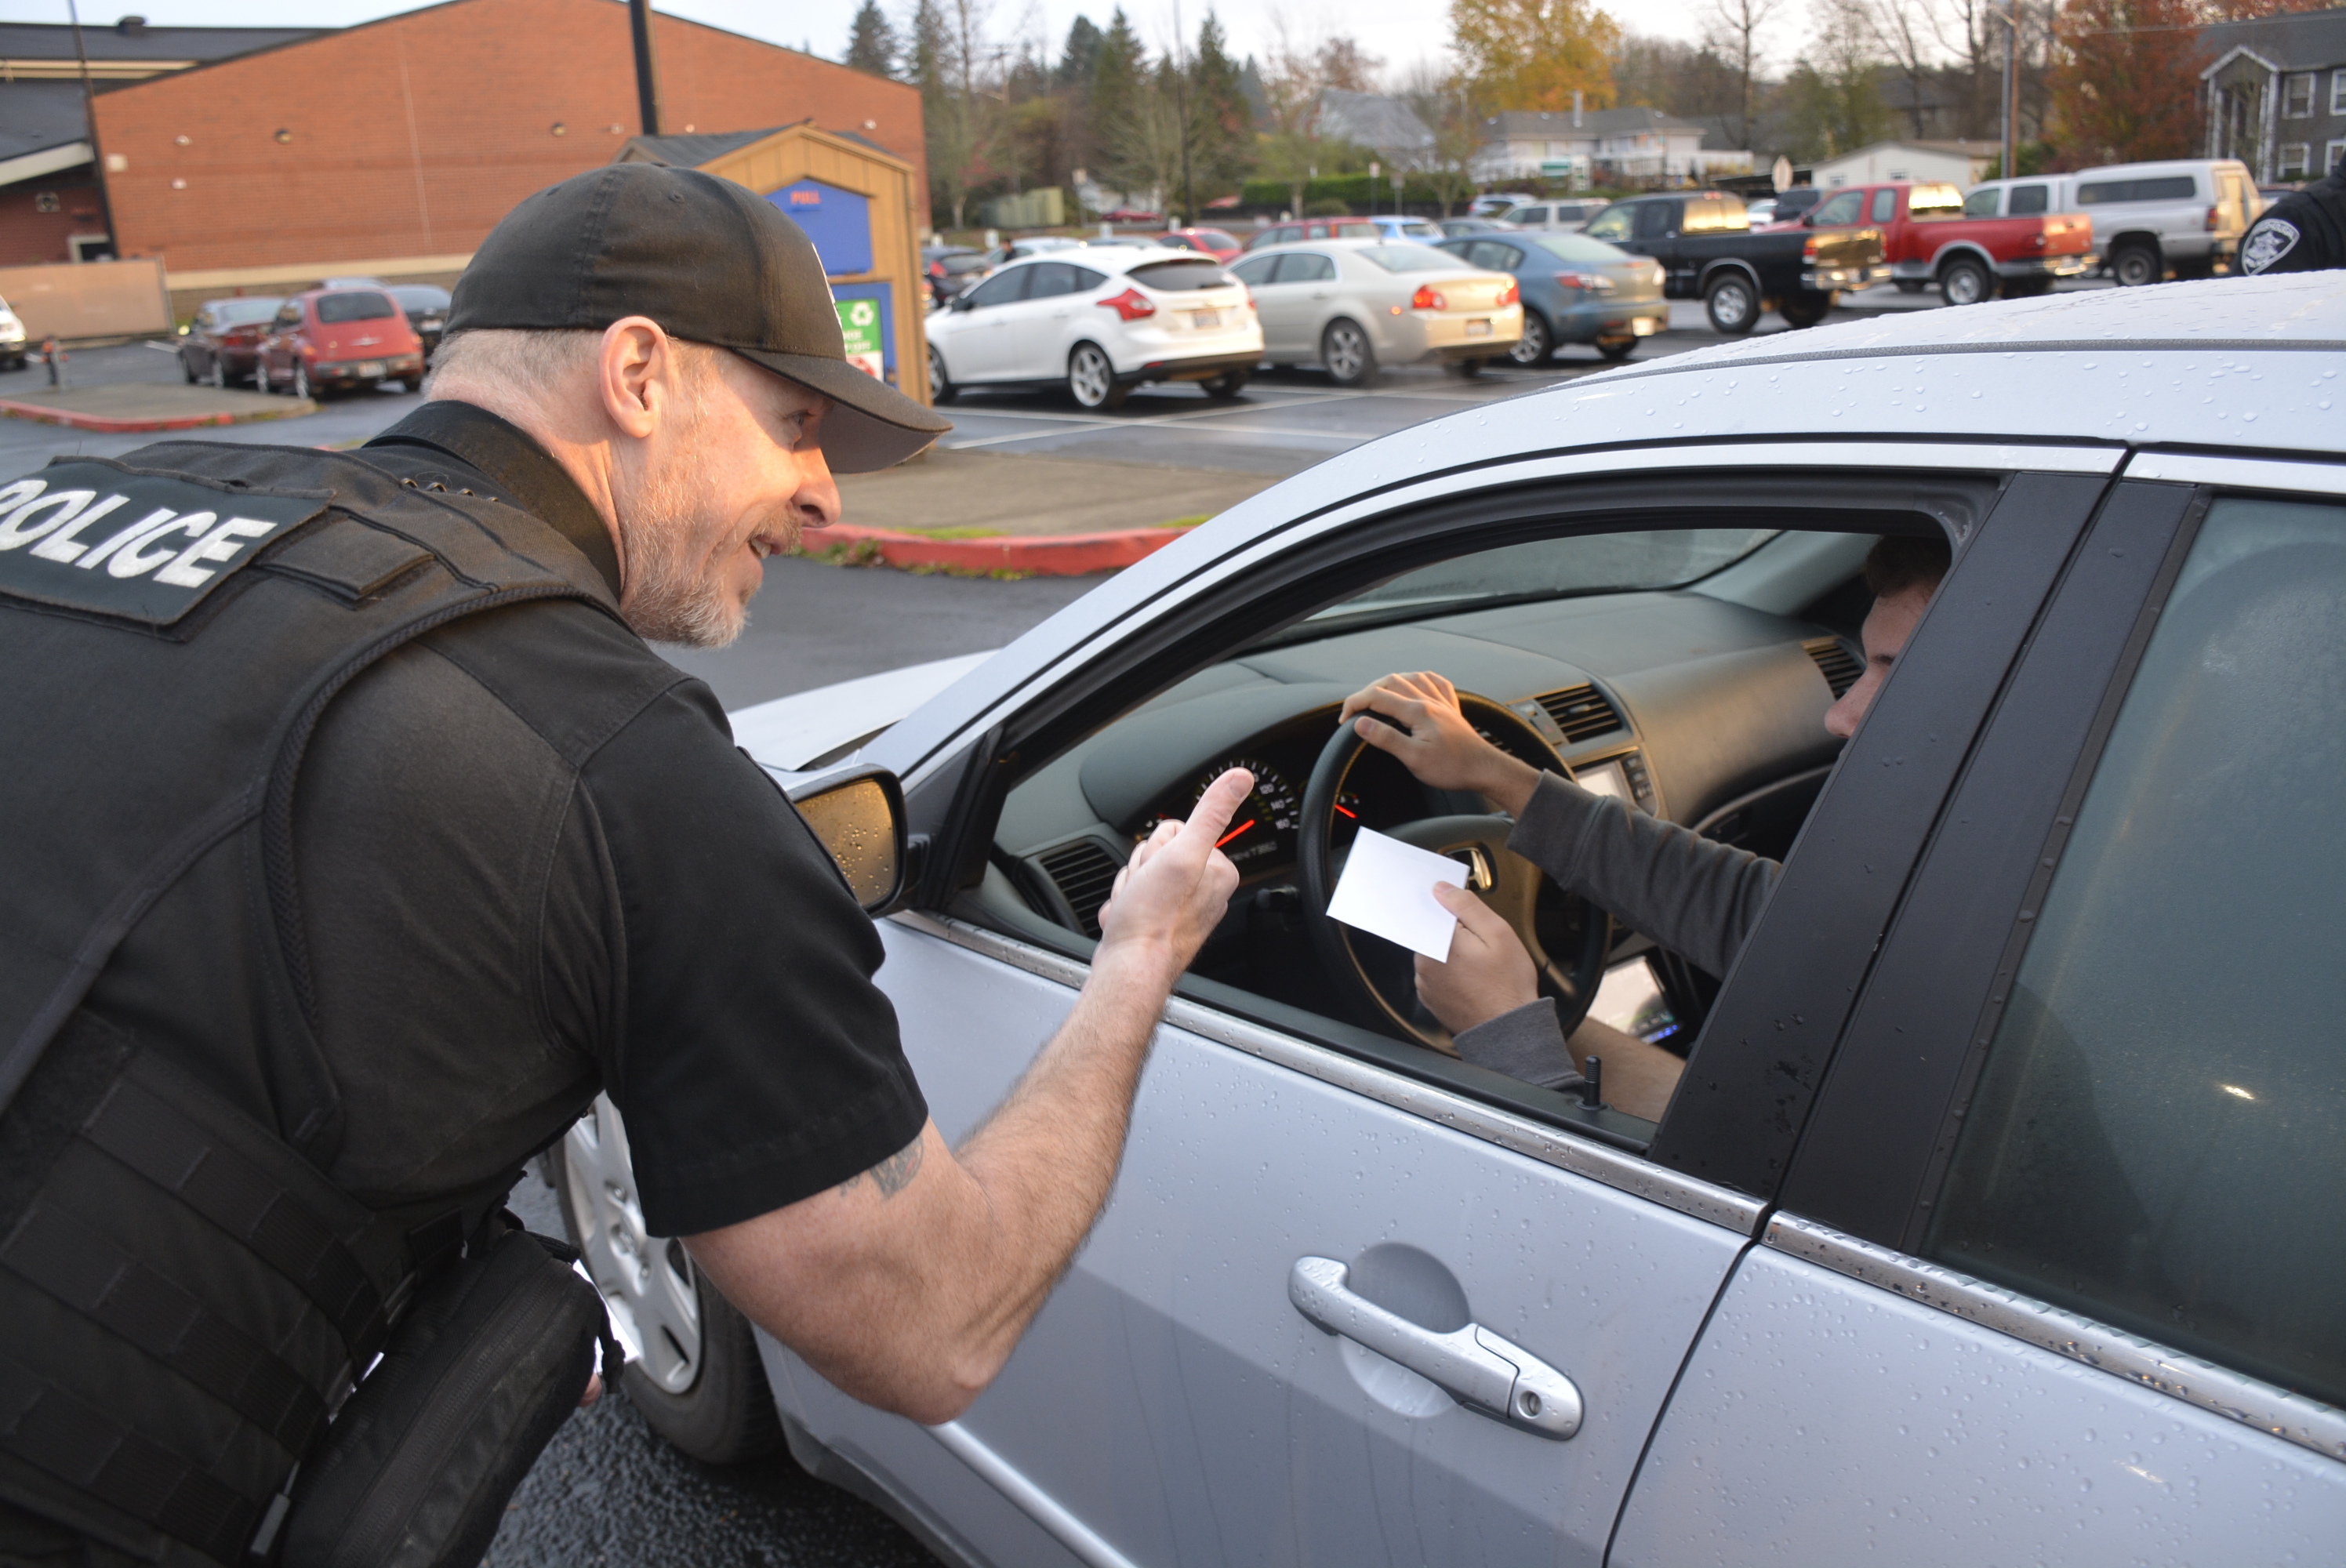 Washougal Police Officer gives thumbs up to teen driver for wearing seatbelt, and provides gift card to student driving car